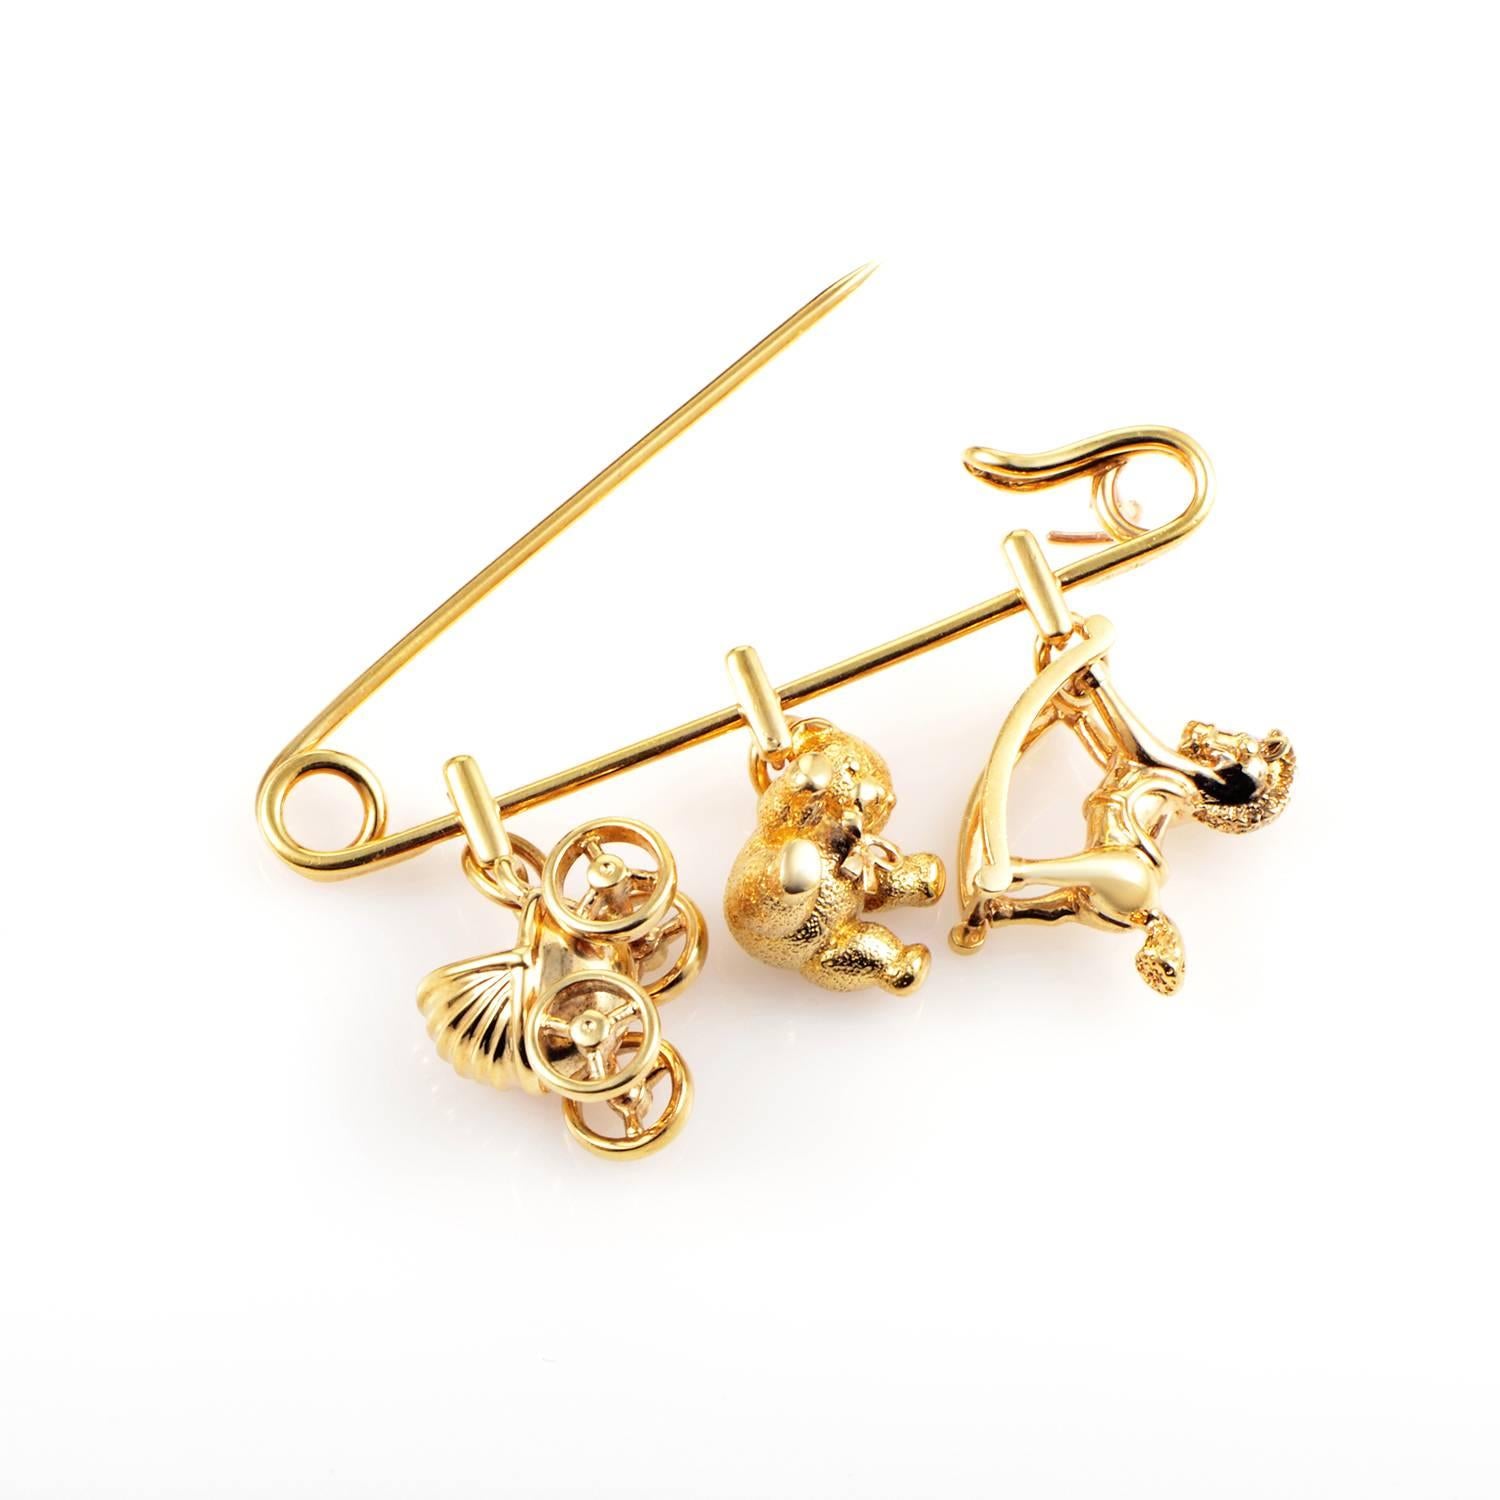 An adorable composition of charms with an overall spirit reminiscent of sweet childhood memories, this exceptional charm pin from Cartier offers an alluring appearance characterized by the prestigious warm radiance of 18K yellow gold.
Included